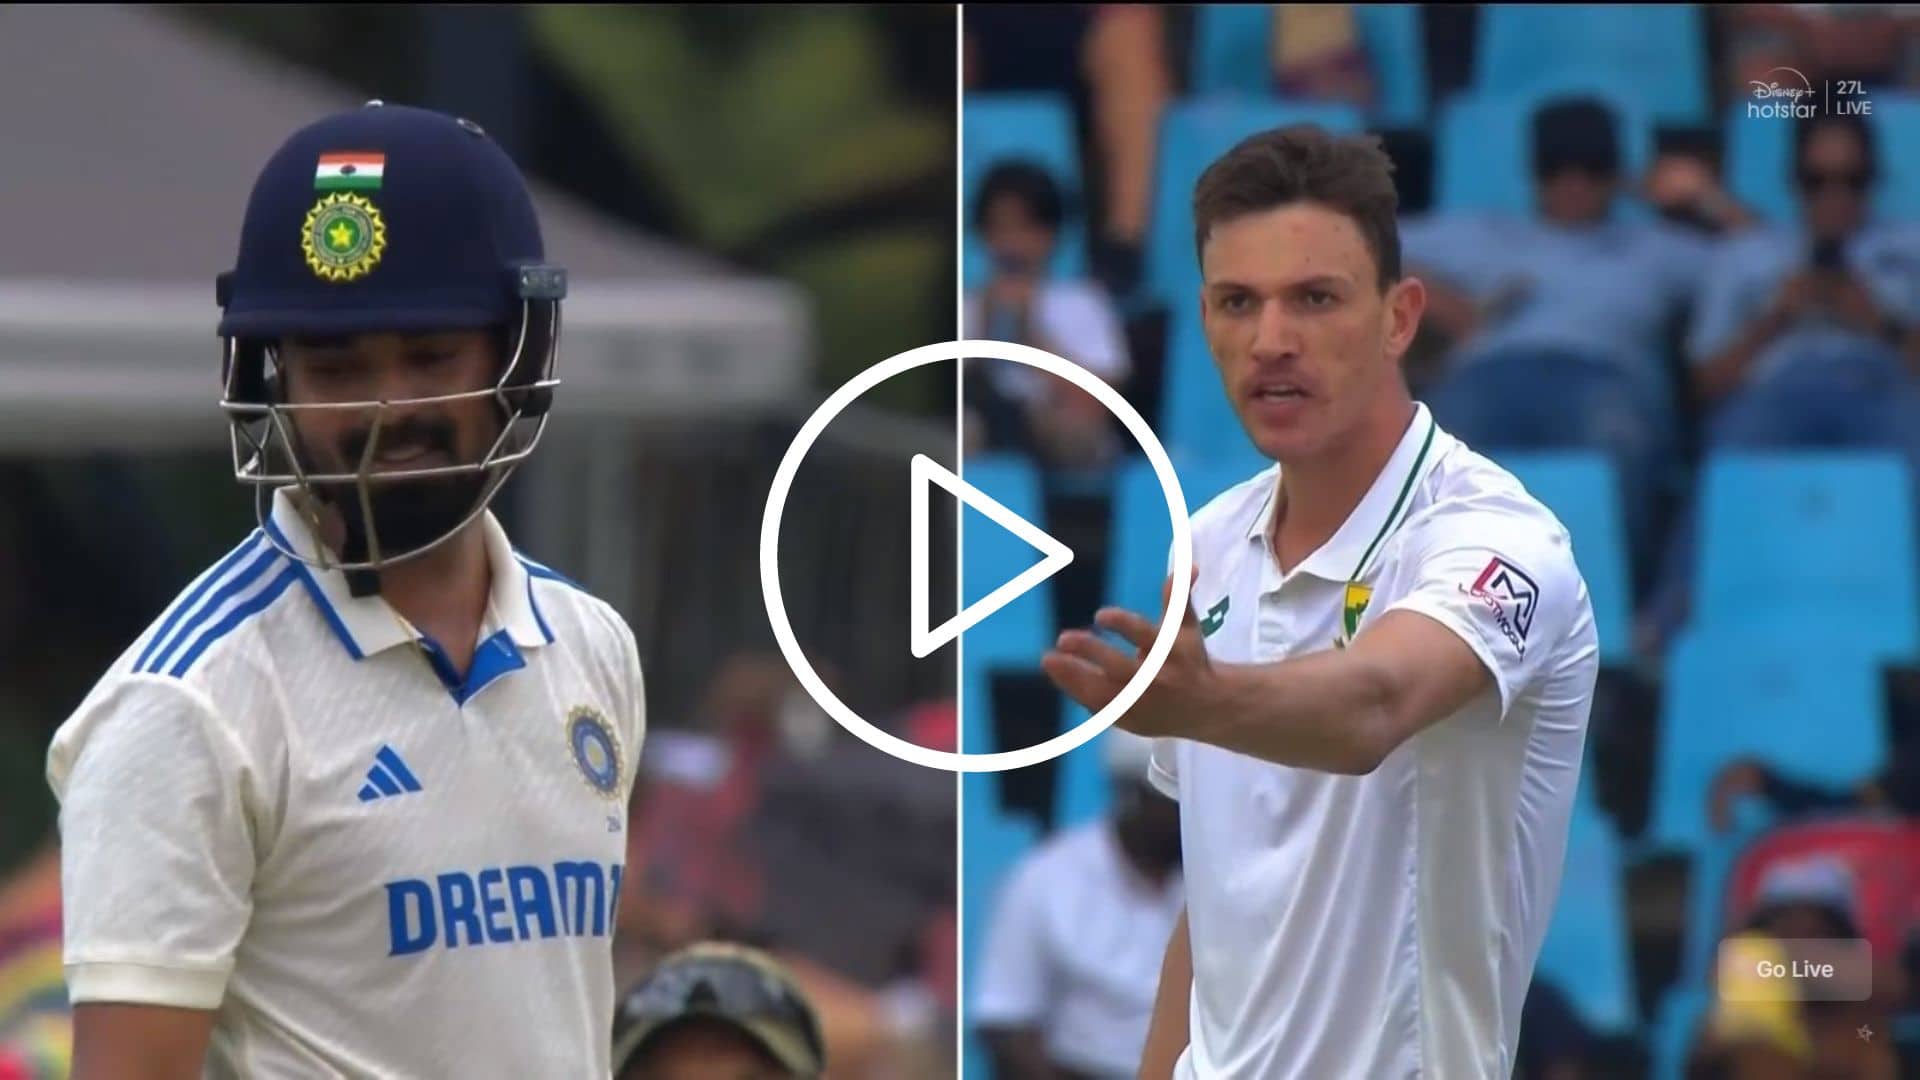 [Watch] KL Rahul And Marco Jansen Engaged In Tense Fight During IND-SA Test